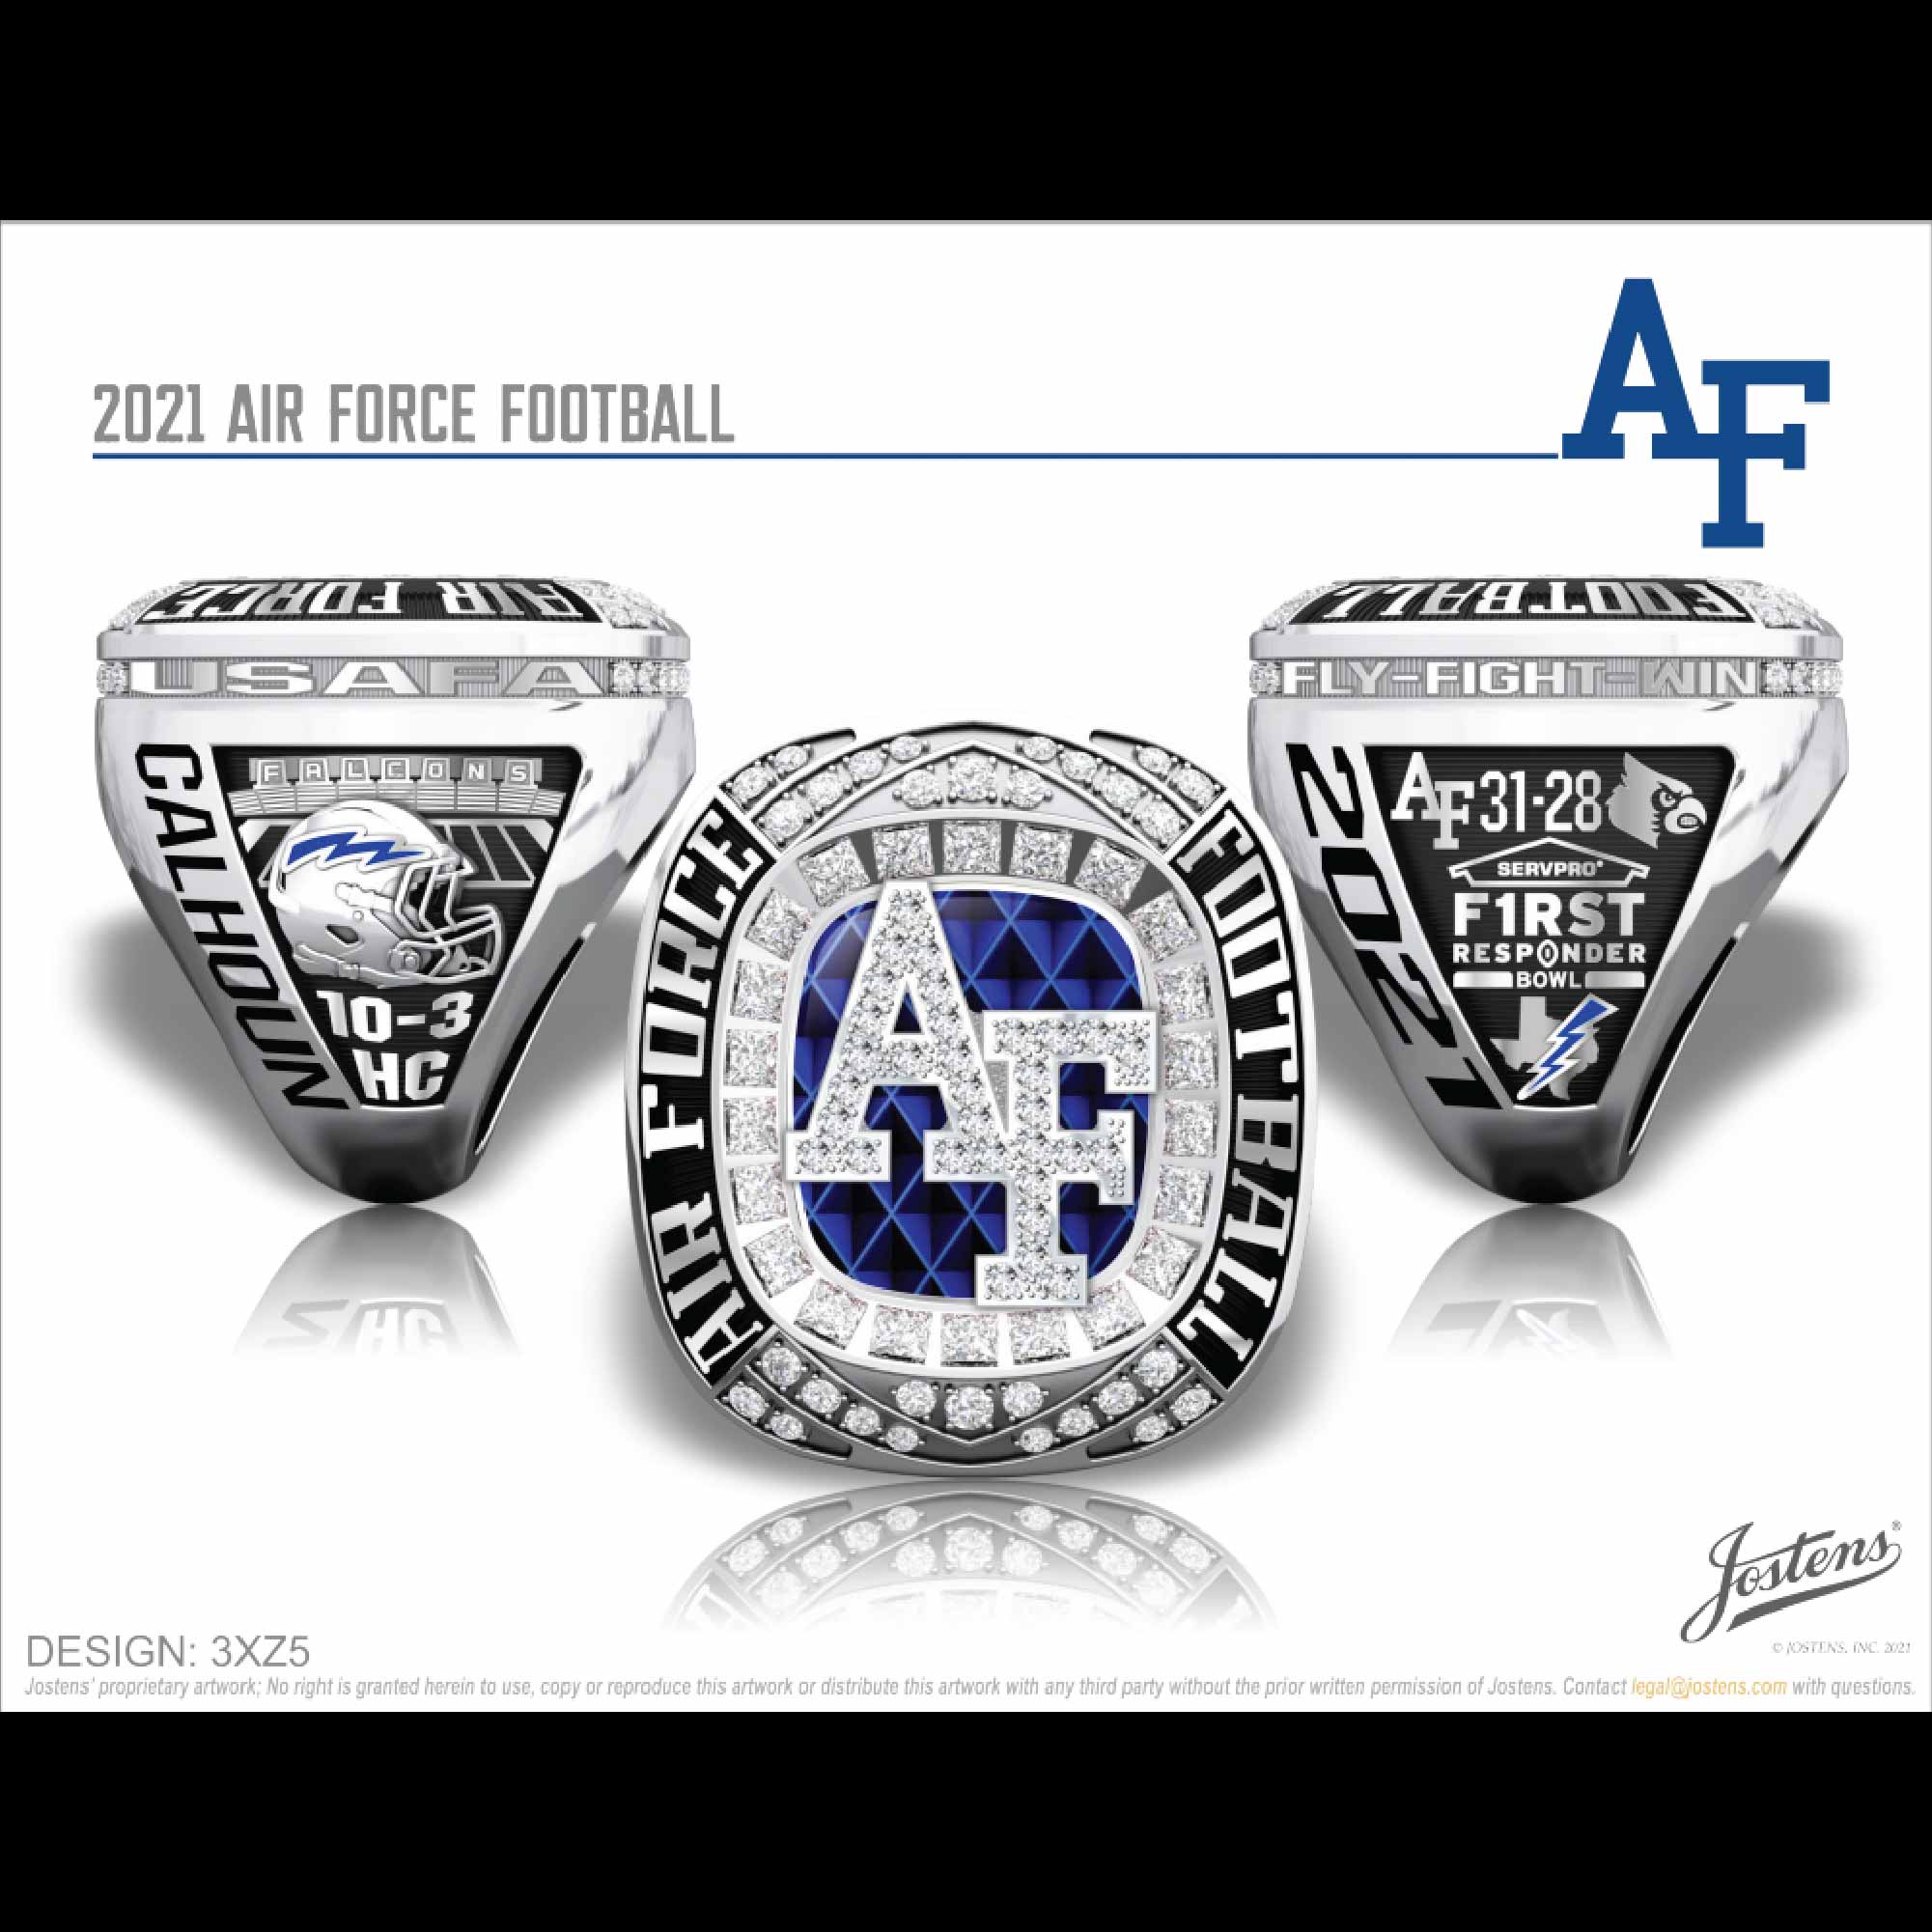 Unites States Air Force Academy Men's Football 2021 First Responders Bowl Championship Ring